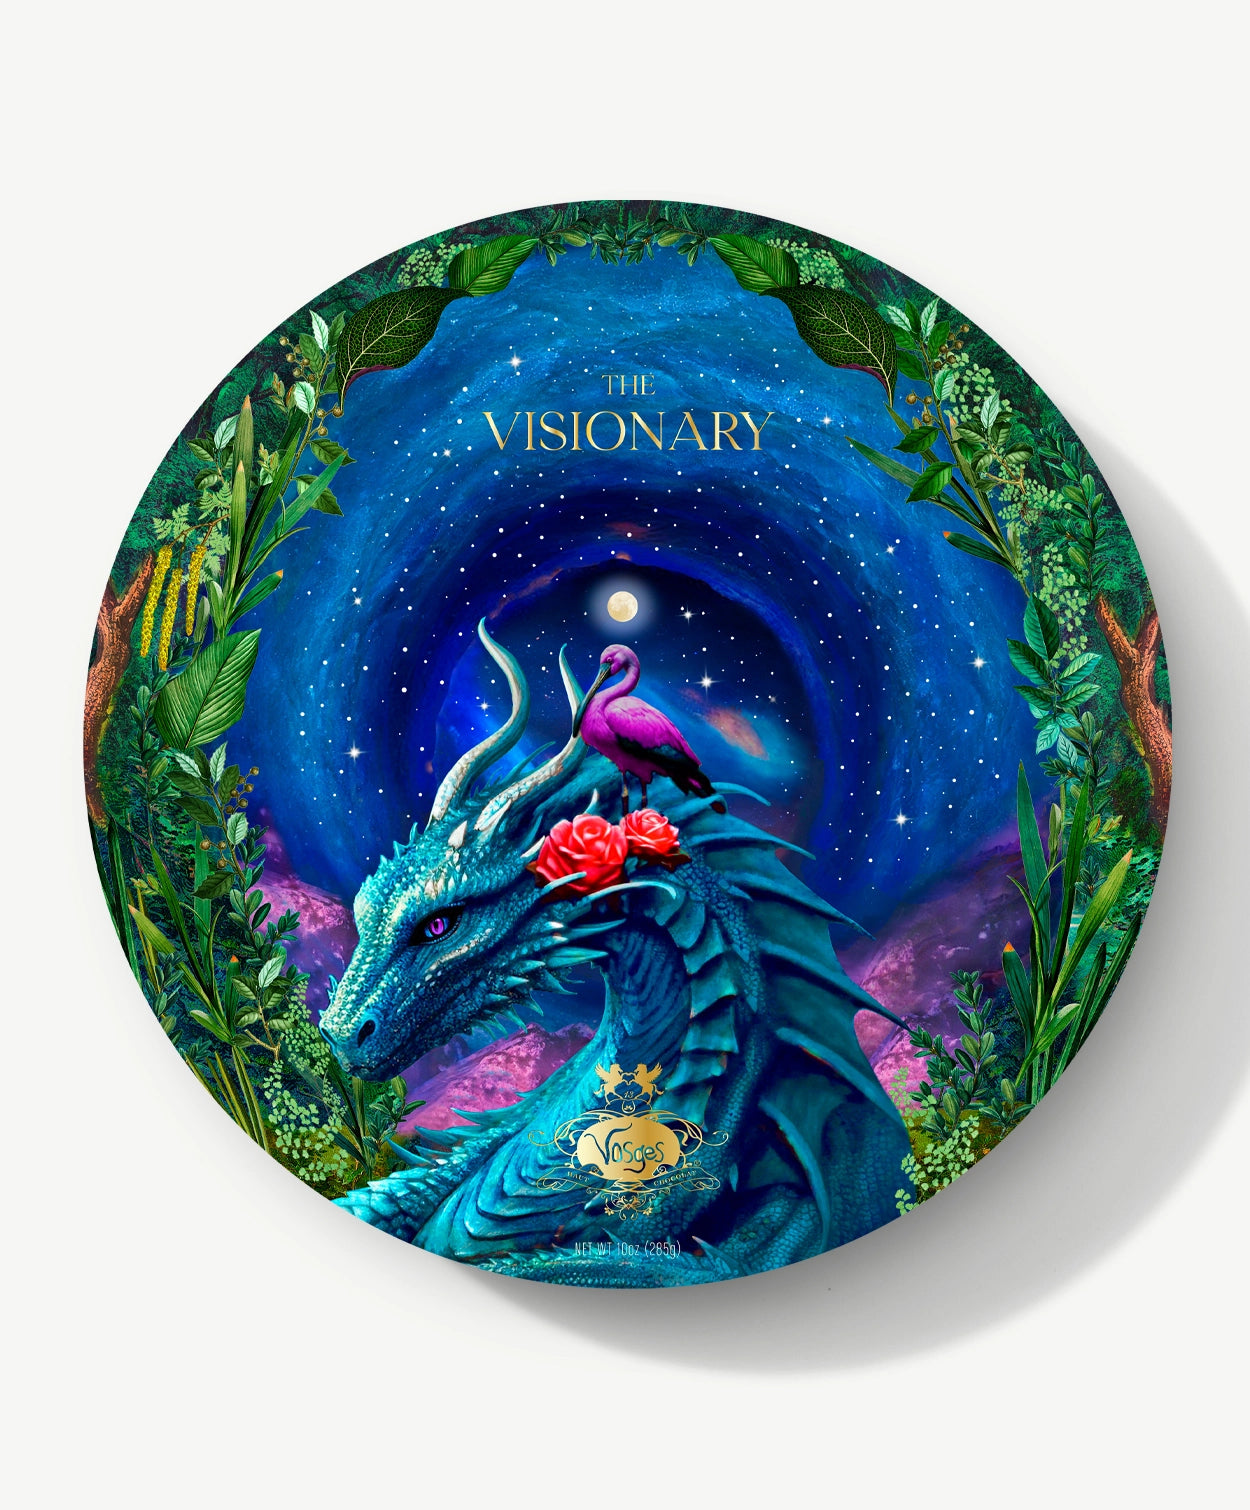 A circular Vosges candy box sits adorned with a wise blue dragon and a pink egret with roses sit in a leafy forest infront a swirling night sky, on a light grey background.